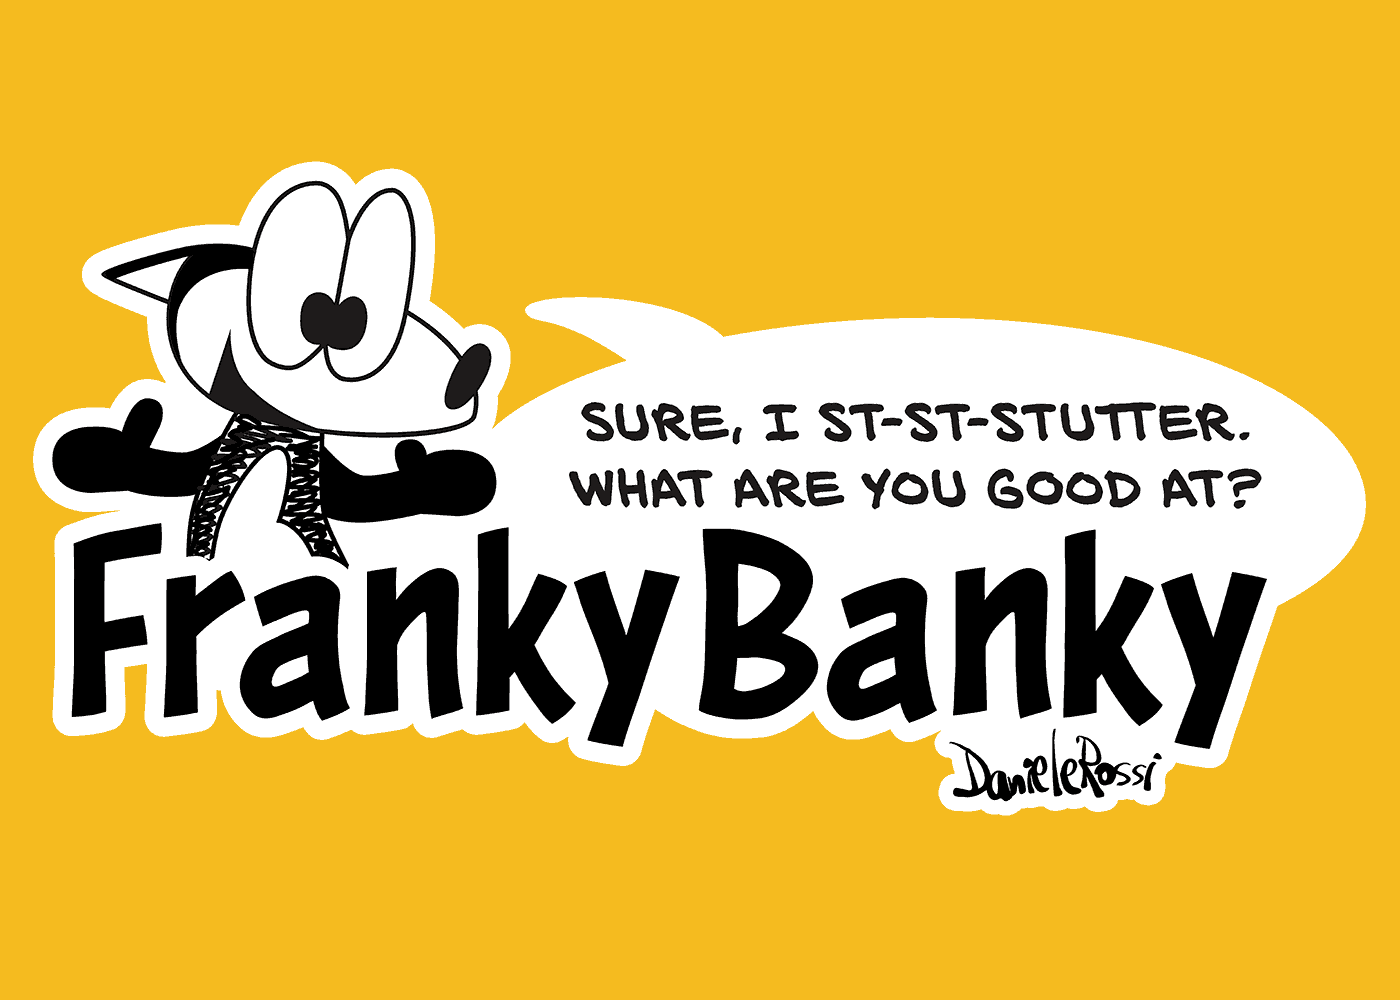 A logo reading Franky Banky with a cartoon fox popping up and stuttering while saying Sure, I stuh stuh stutter. What arecyou good at.